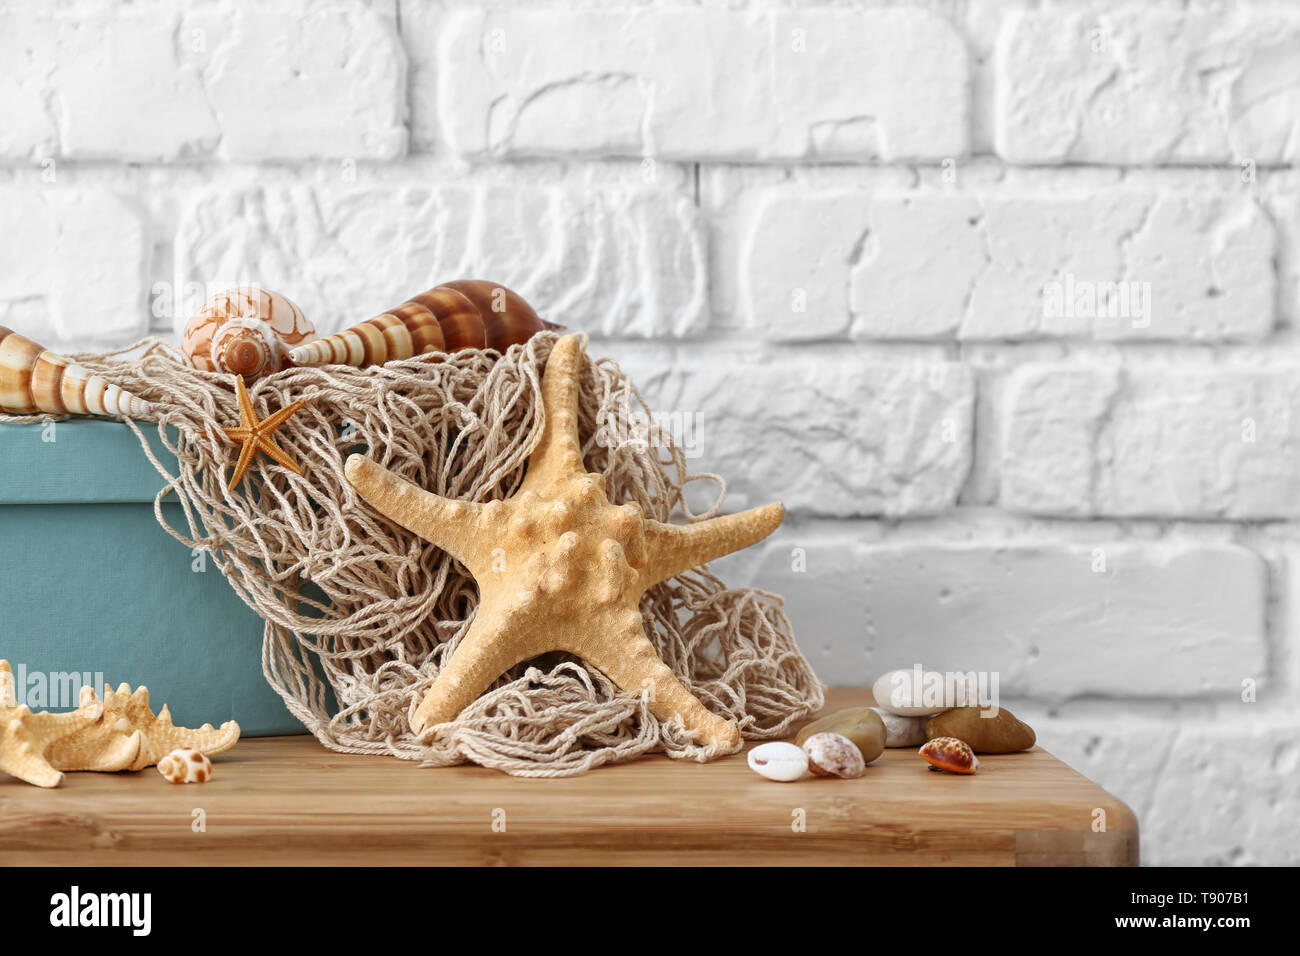 Starfish, seashells and pebbles as decorations on table near white